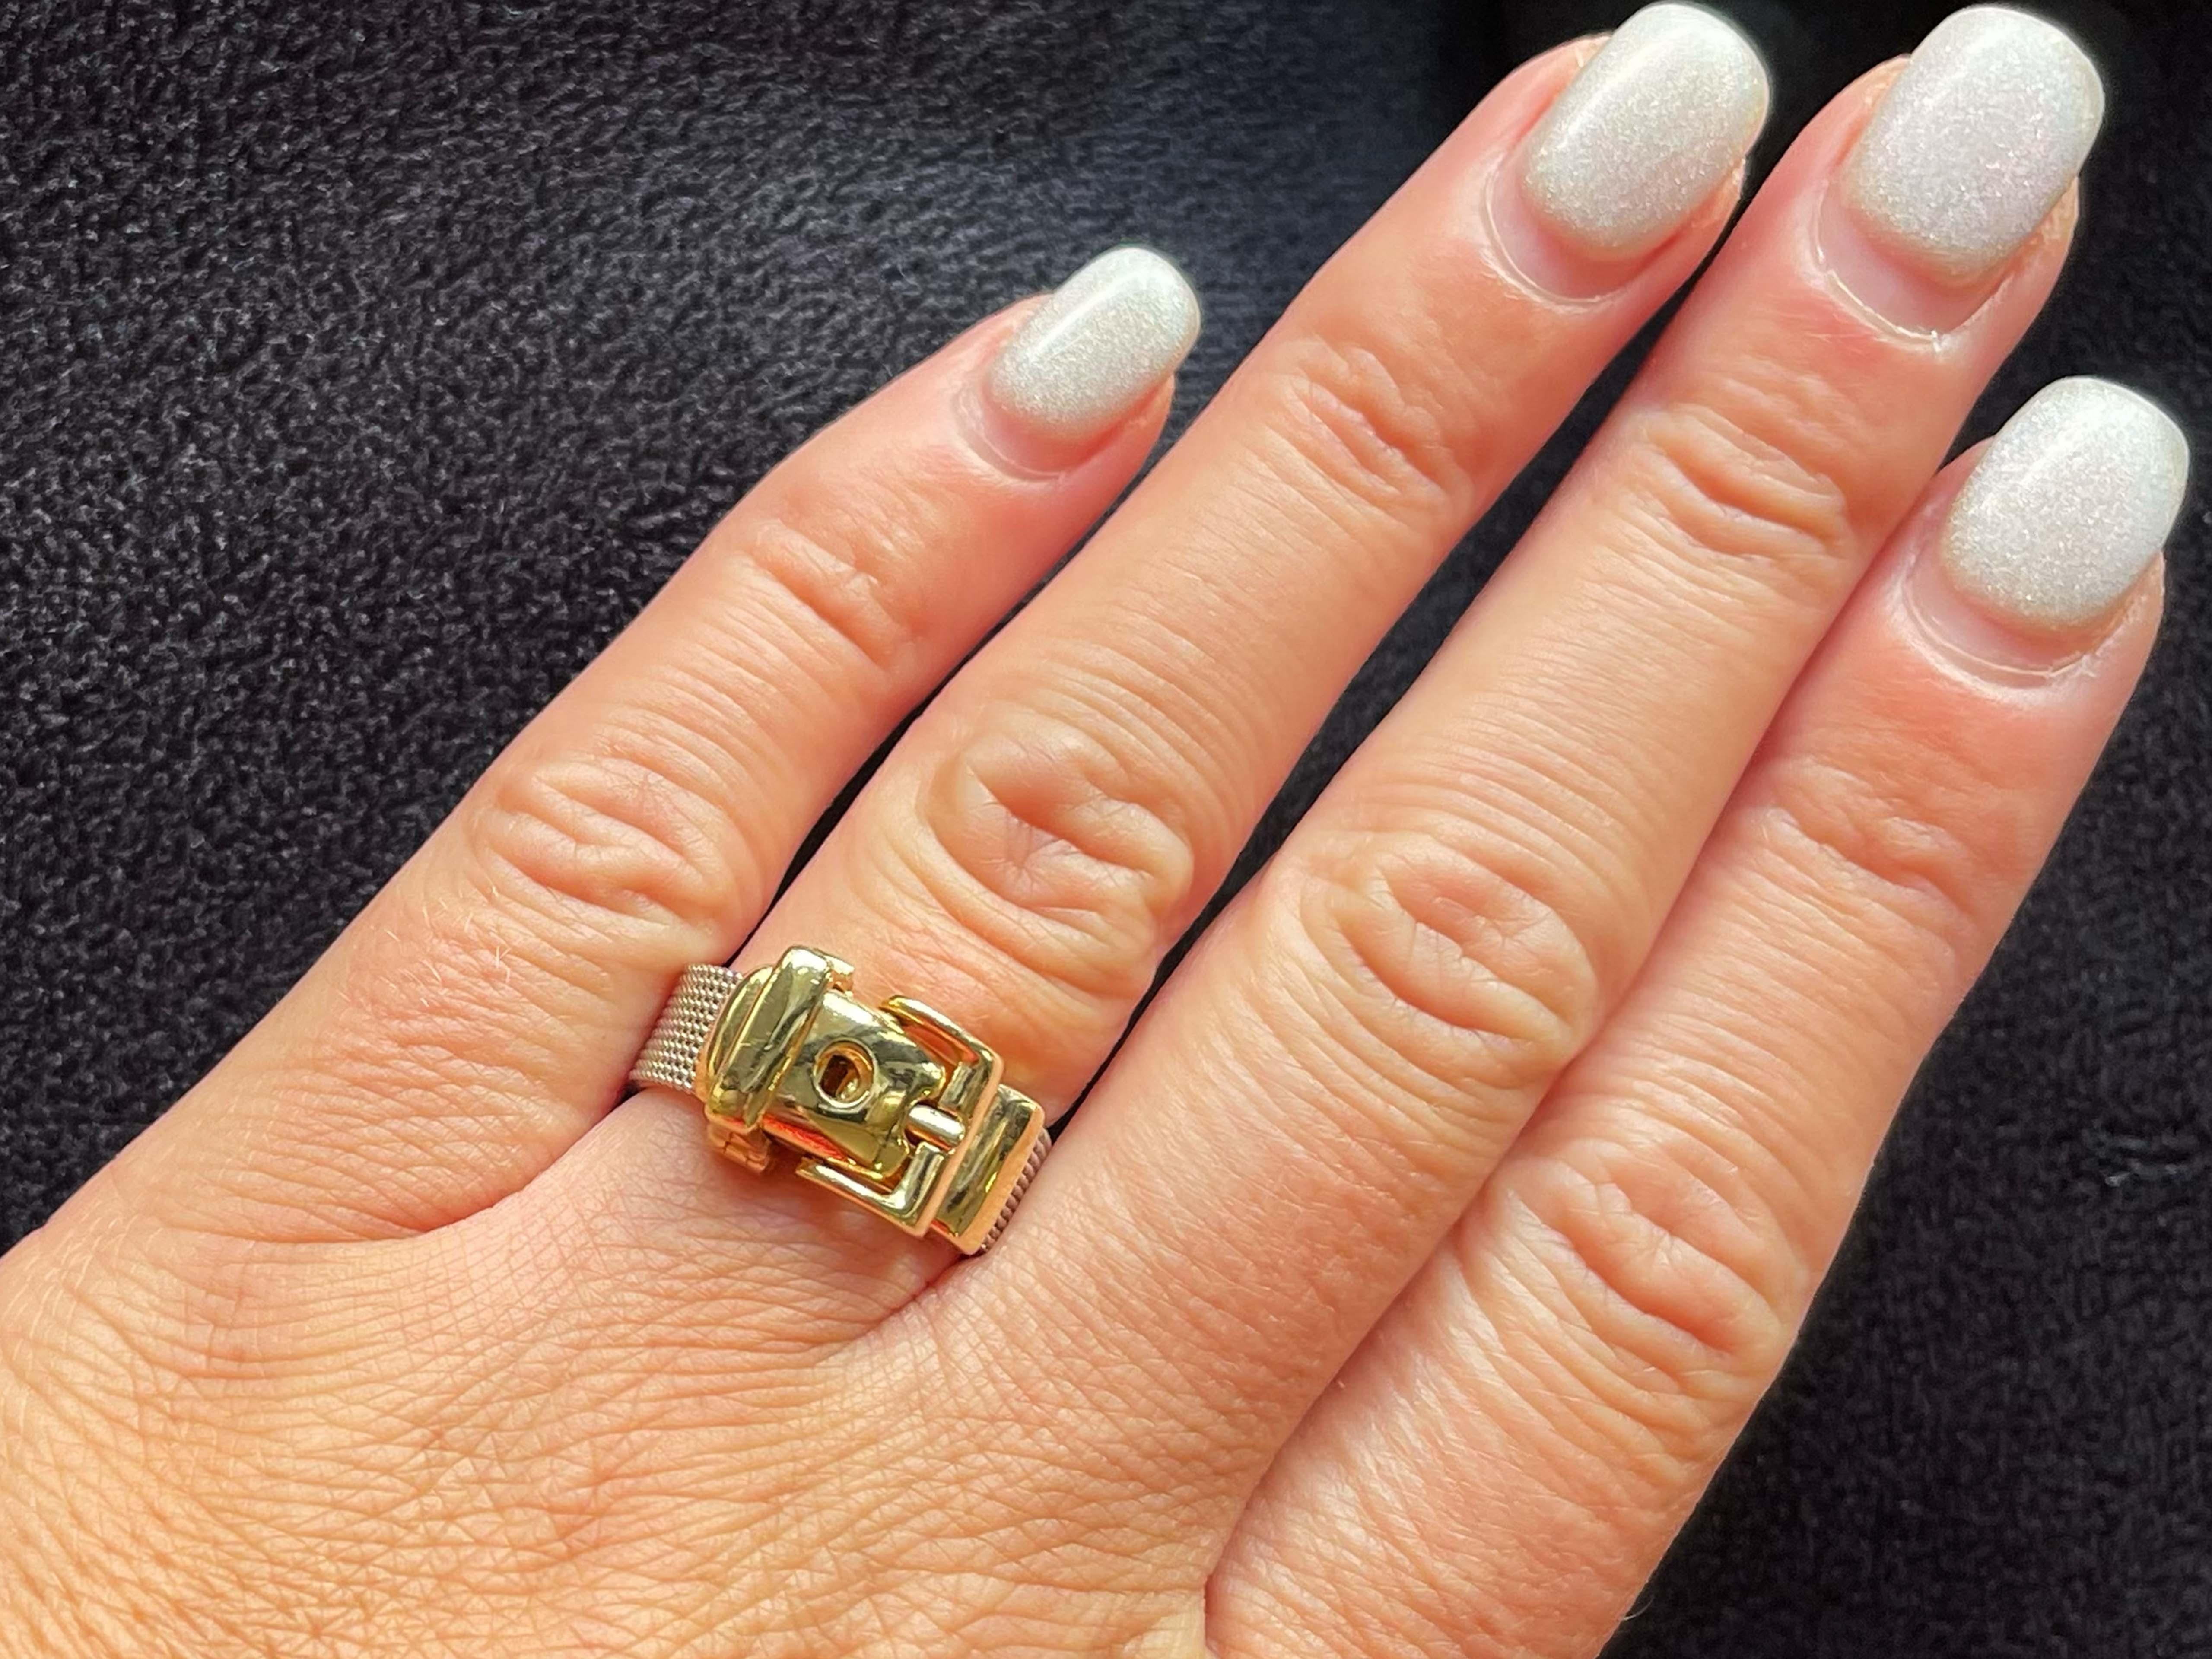 Item Specifications:

Metal: 14K Yellow and White Gold

Style: Statement Ring

Ring Size: 7.5 or 9.5 when looped in other hole

Total Weight: 6.1 Grams

Condition: Preowned, excellent

Stamped: 